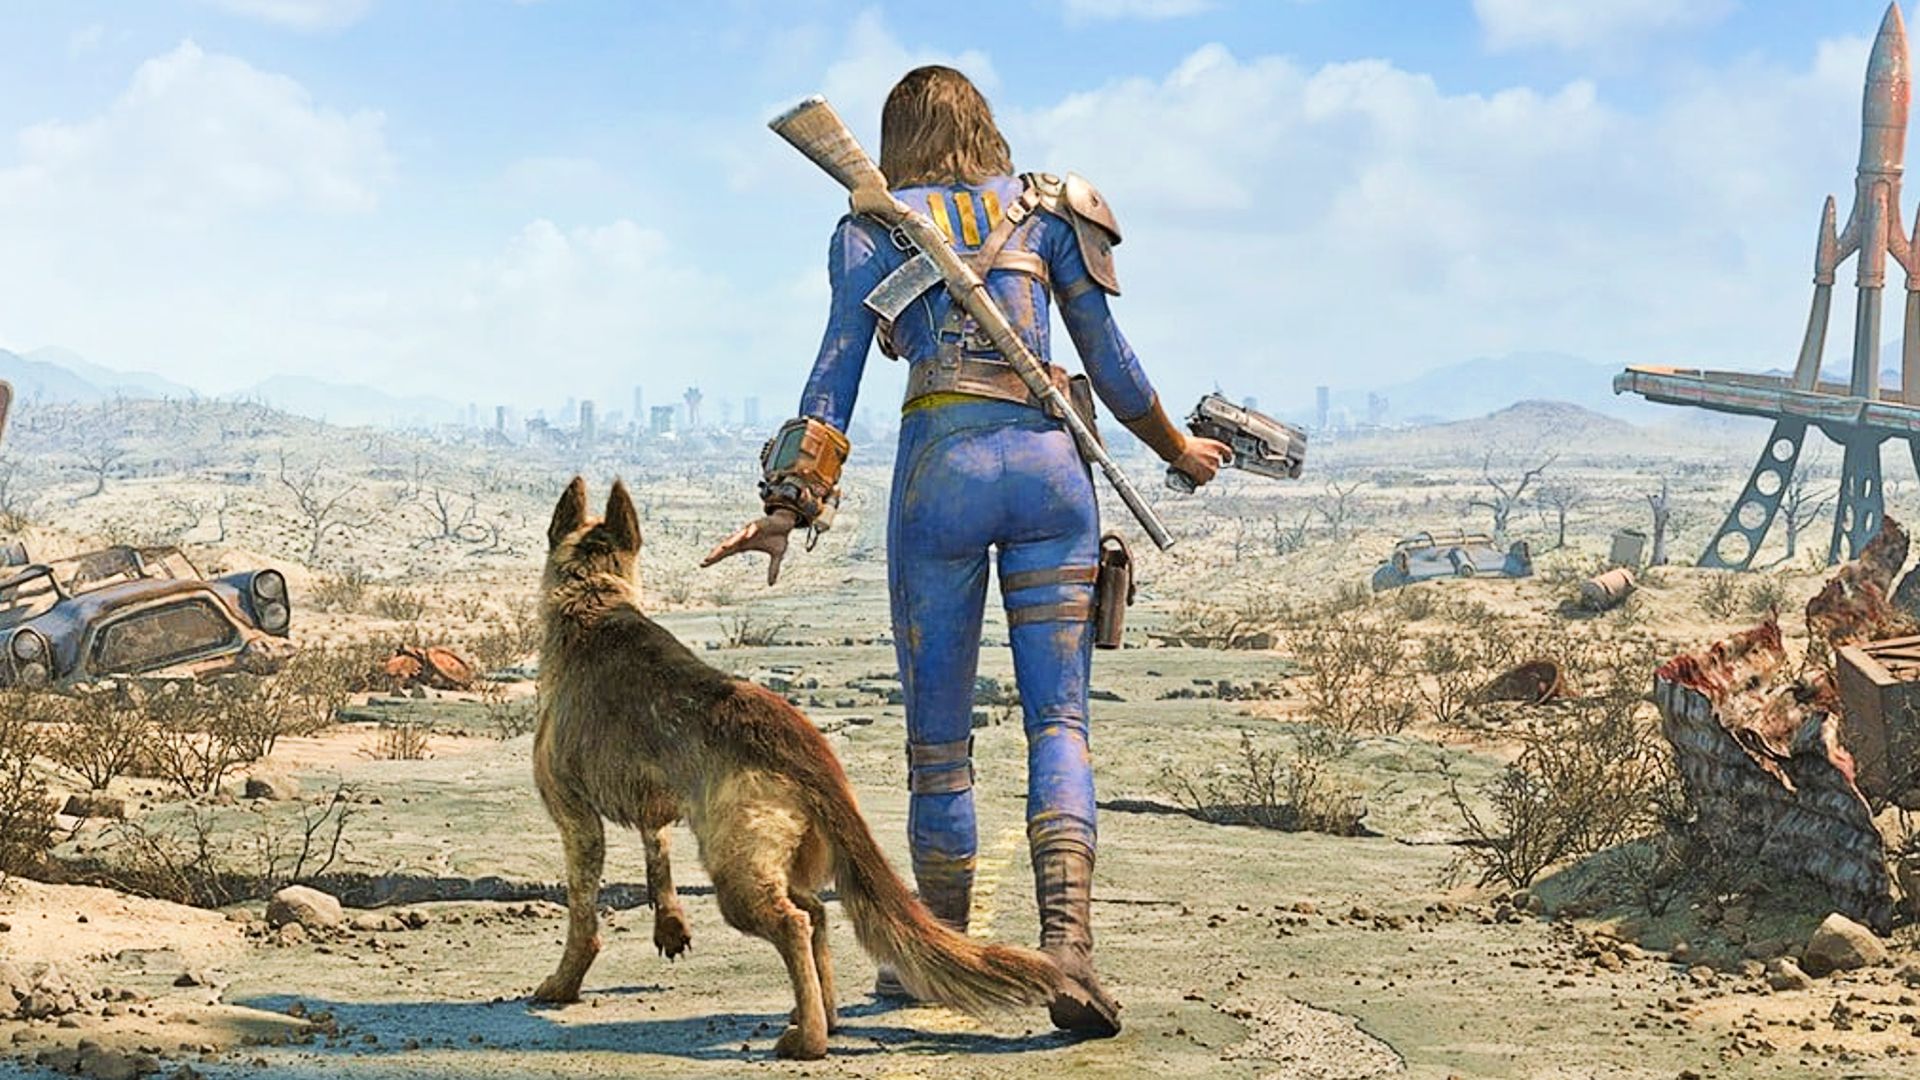 Fallout 4 Next-Gen Update: Timeline and Enhancements